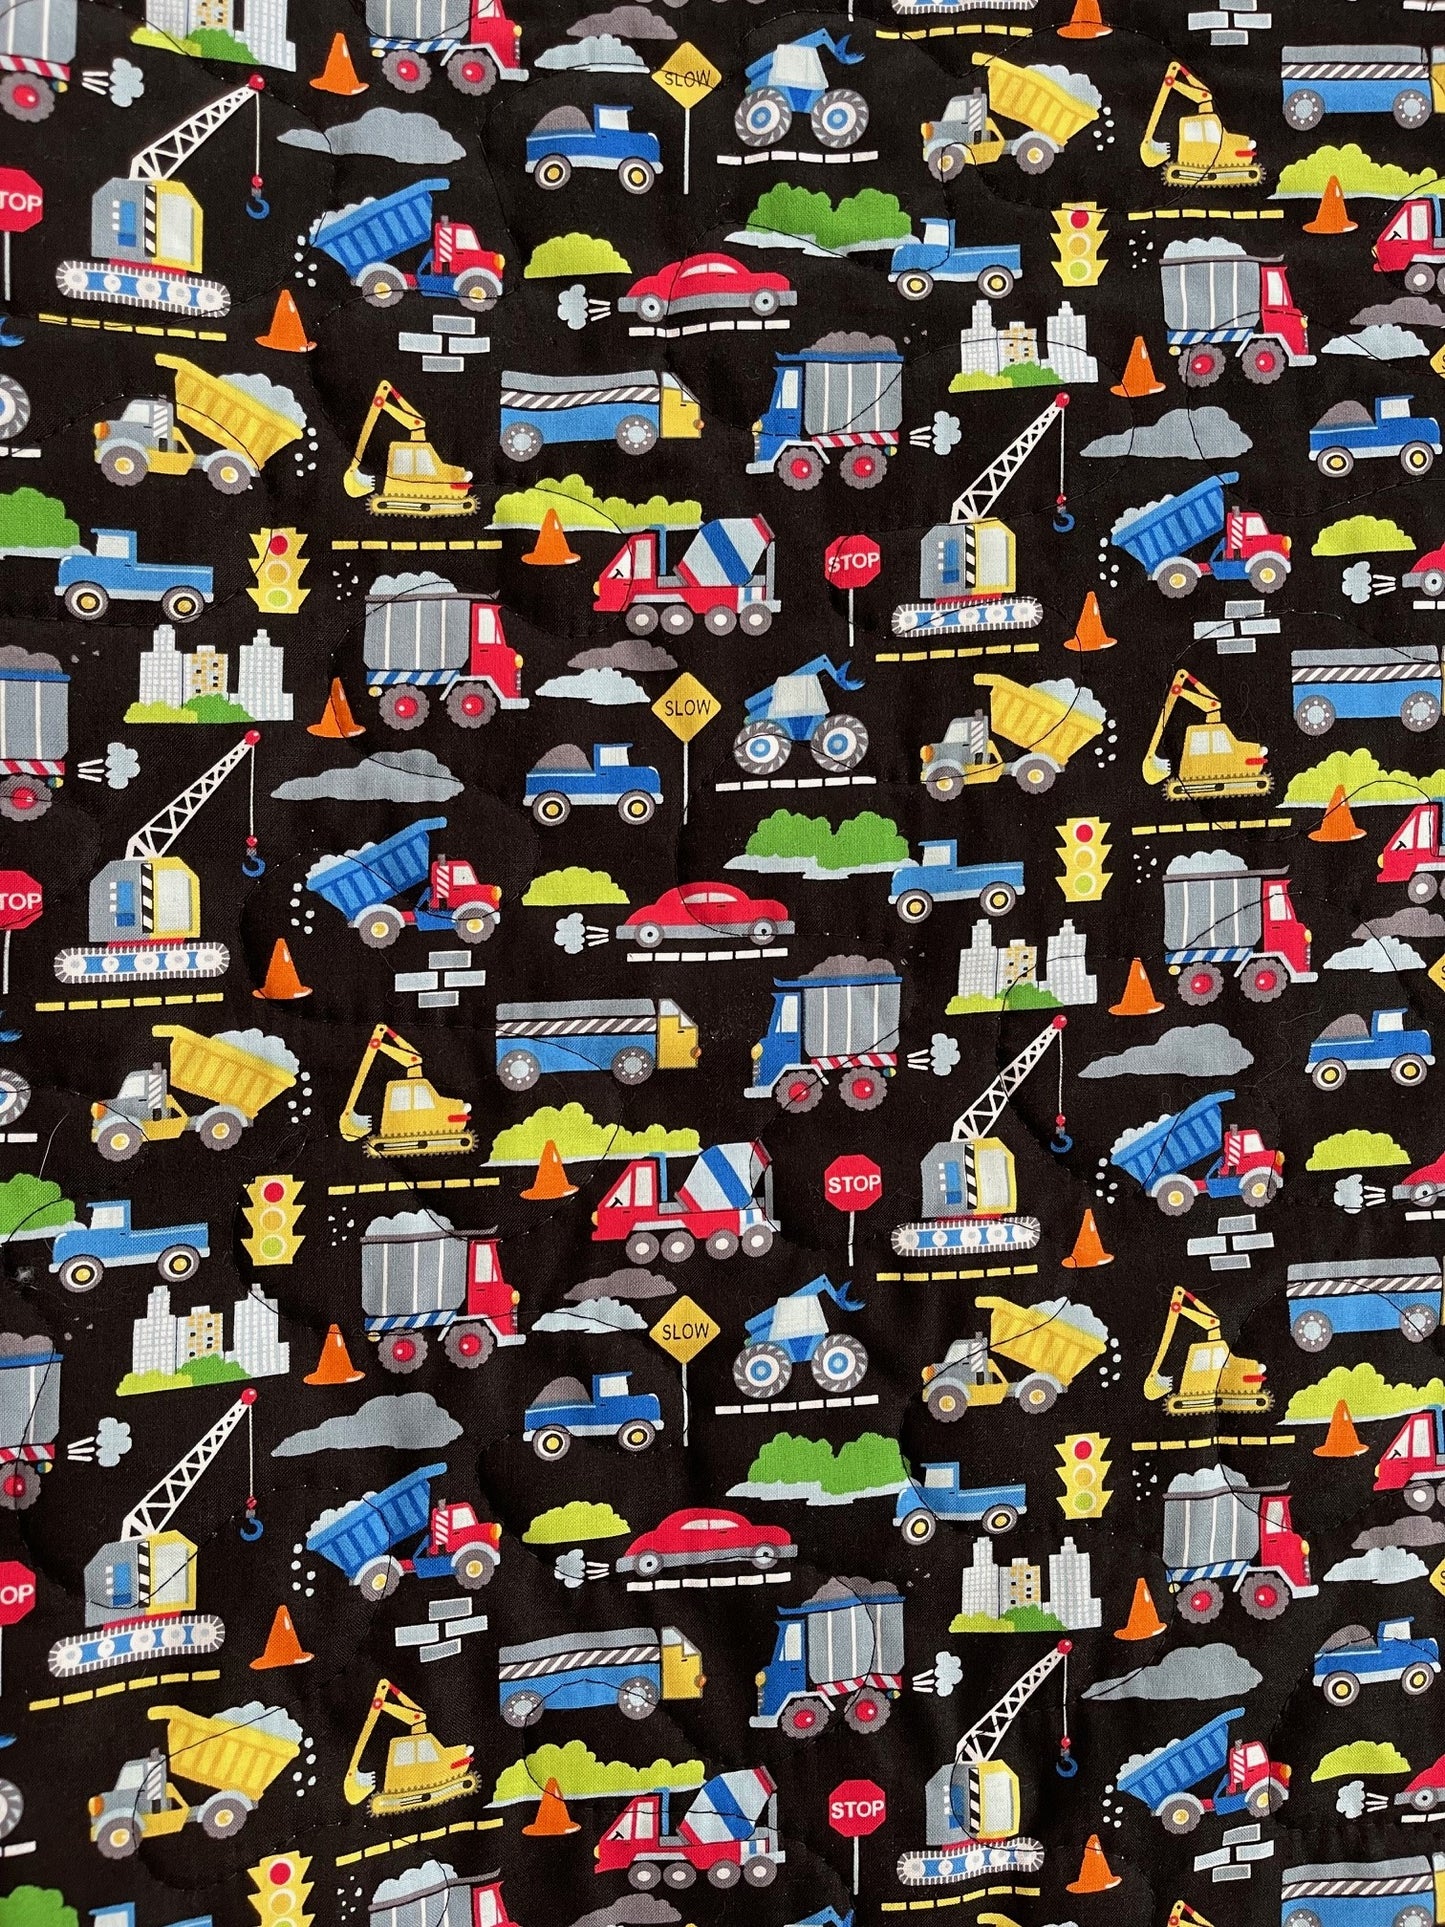 MY FAVORITE CONSTRUCTION TRUCKS 36"X44" Work Area Detour Construction Quilted Blanket